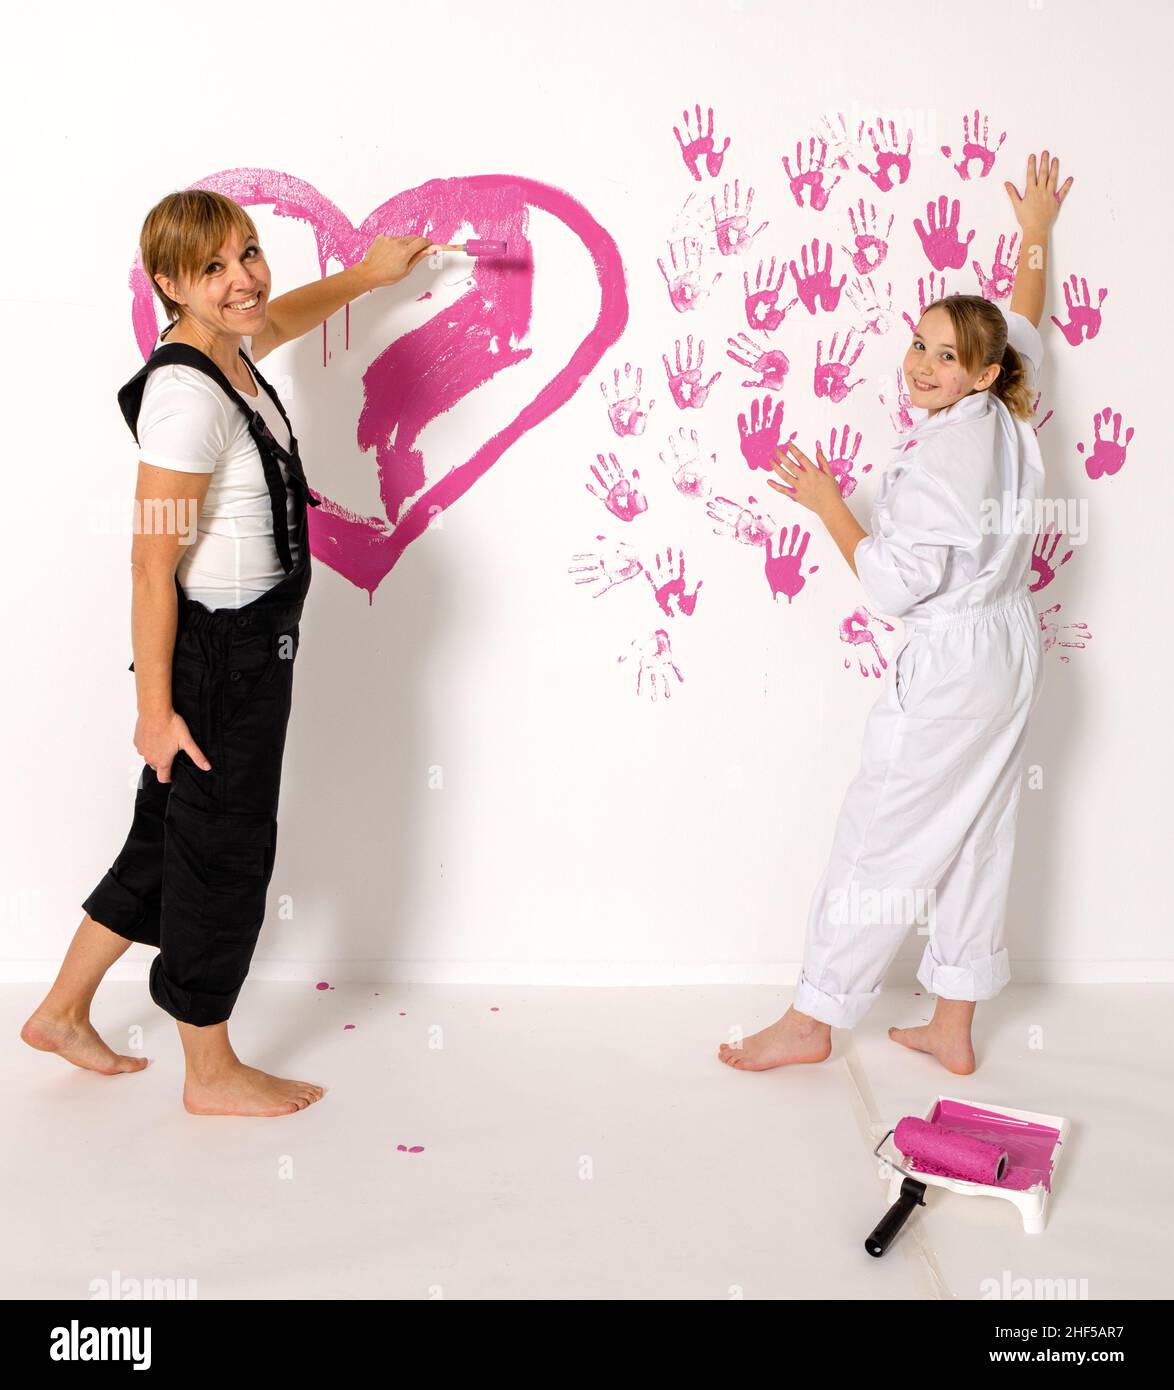 Mother and 10 year old daughter is painting with pink color on white wall. They are both looking into camera with happy smiles. Stock Photo